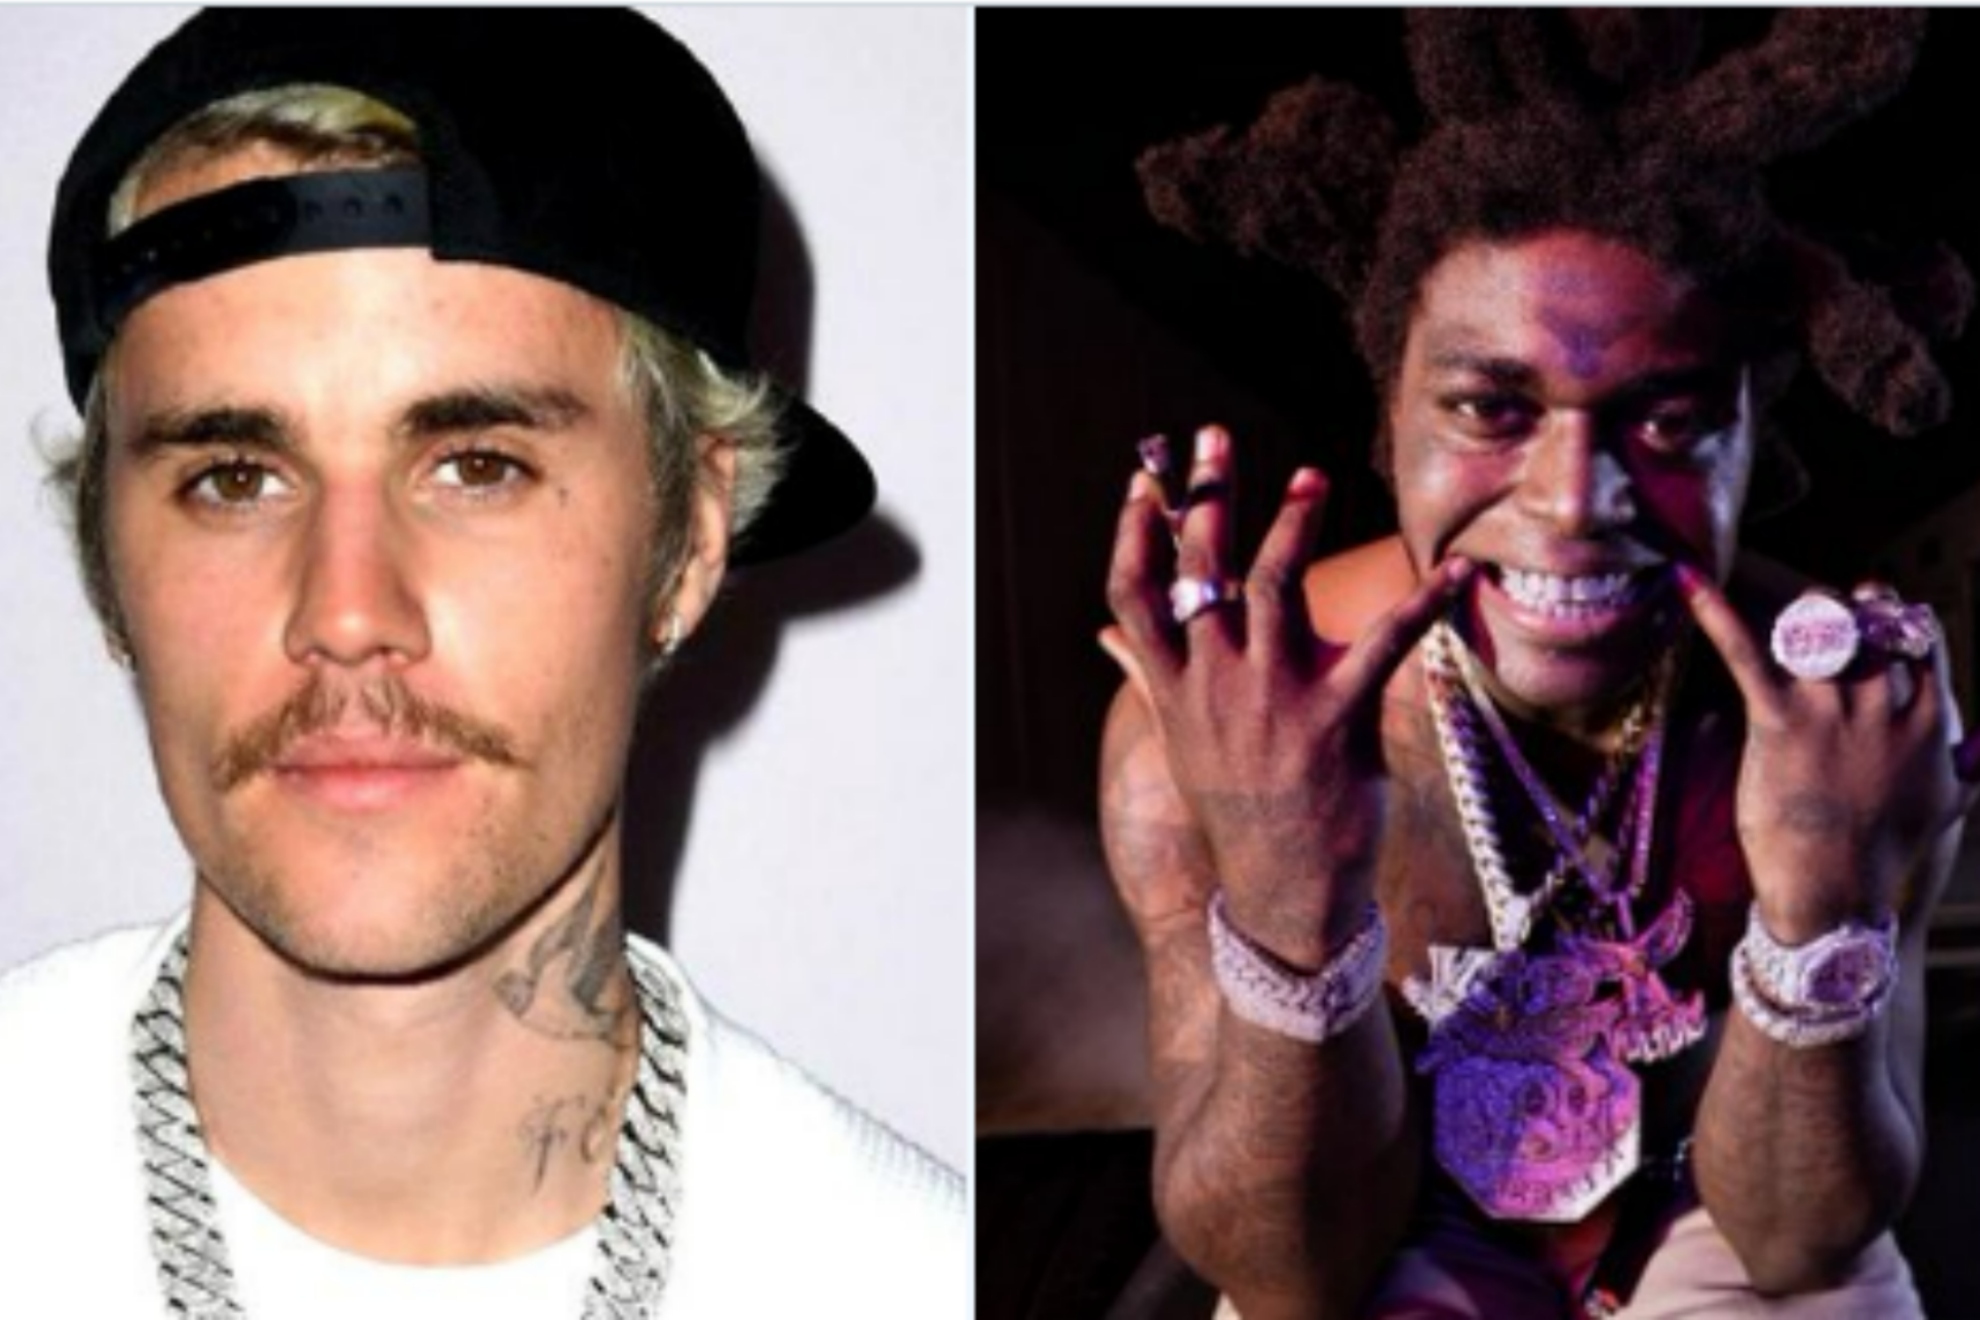 Justin Bieber, Kodak Black, and others are being sued by victims of a shooting that occurred during Super Bowl LVI